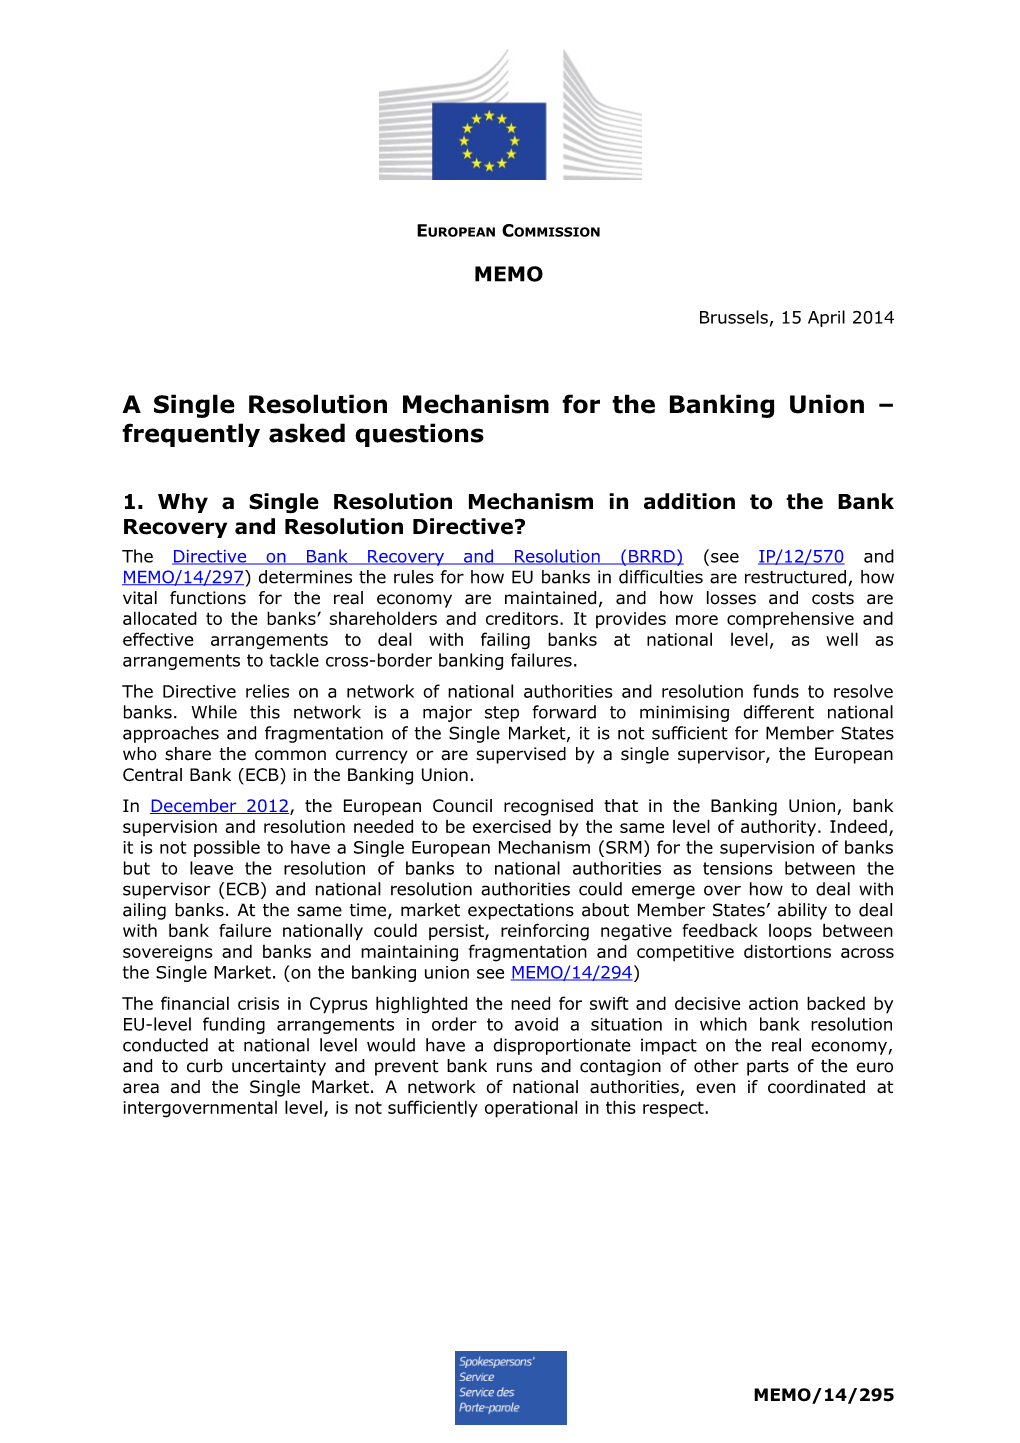 Asingle Resolution Mechanism for the Banking Union Frequently Asked Questions